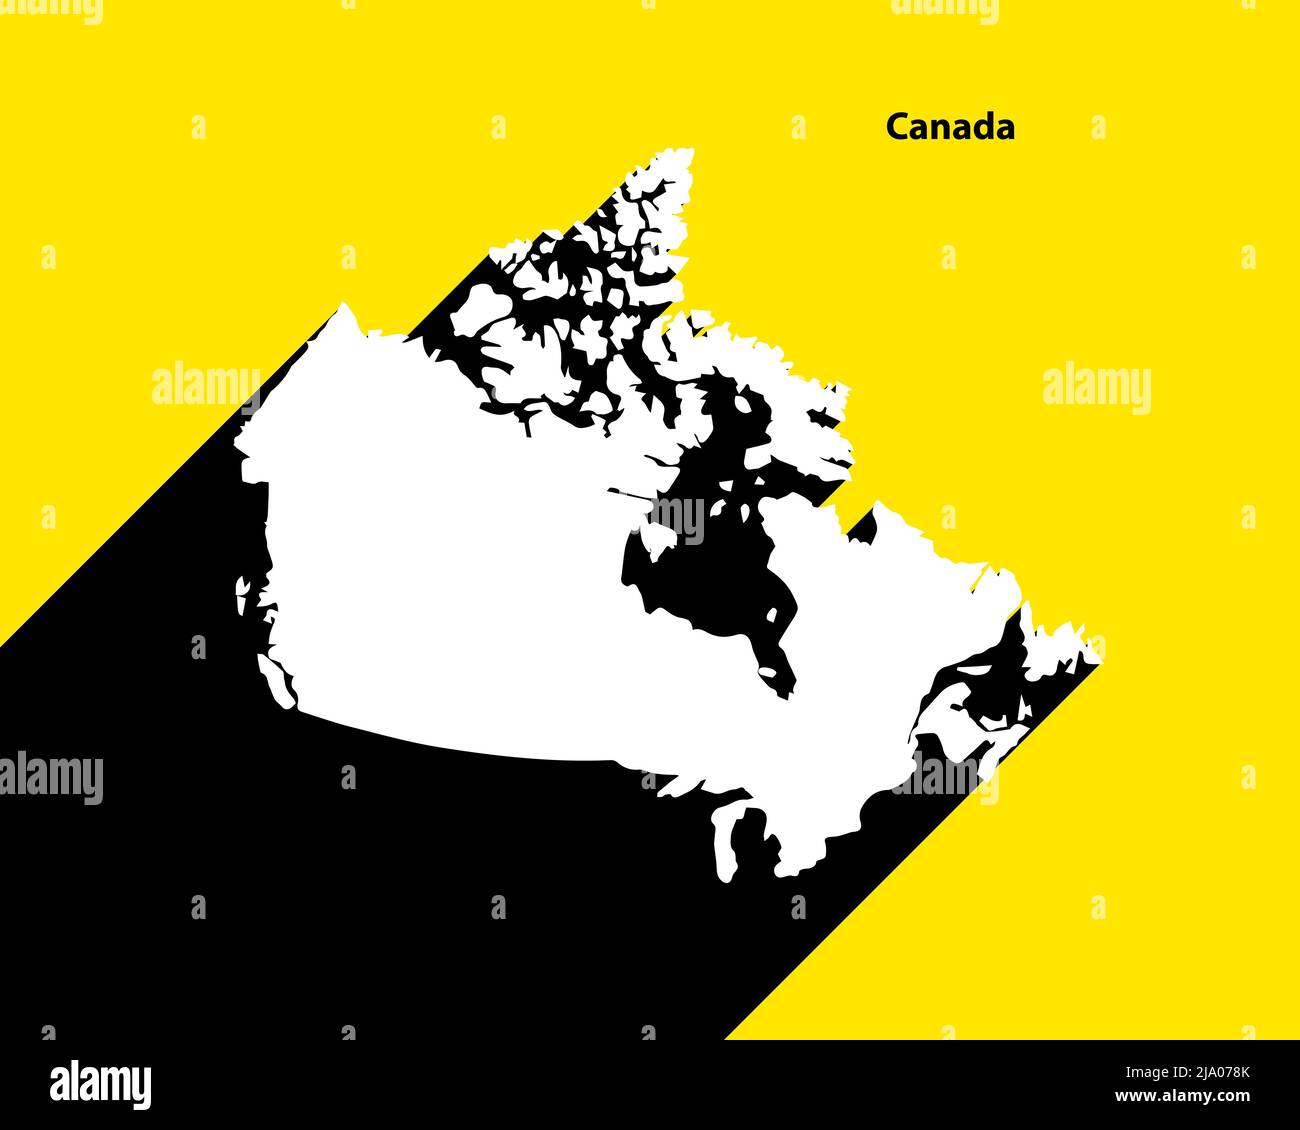 Canada Map on retro poster with long shadow. Vintage sign easy to edit, manipulate, resize or colorize. Stock Vector